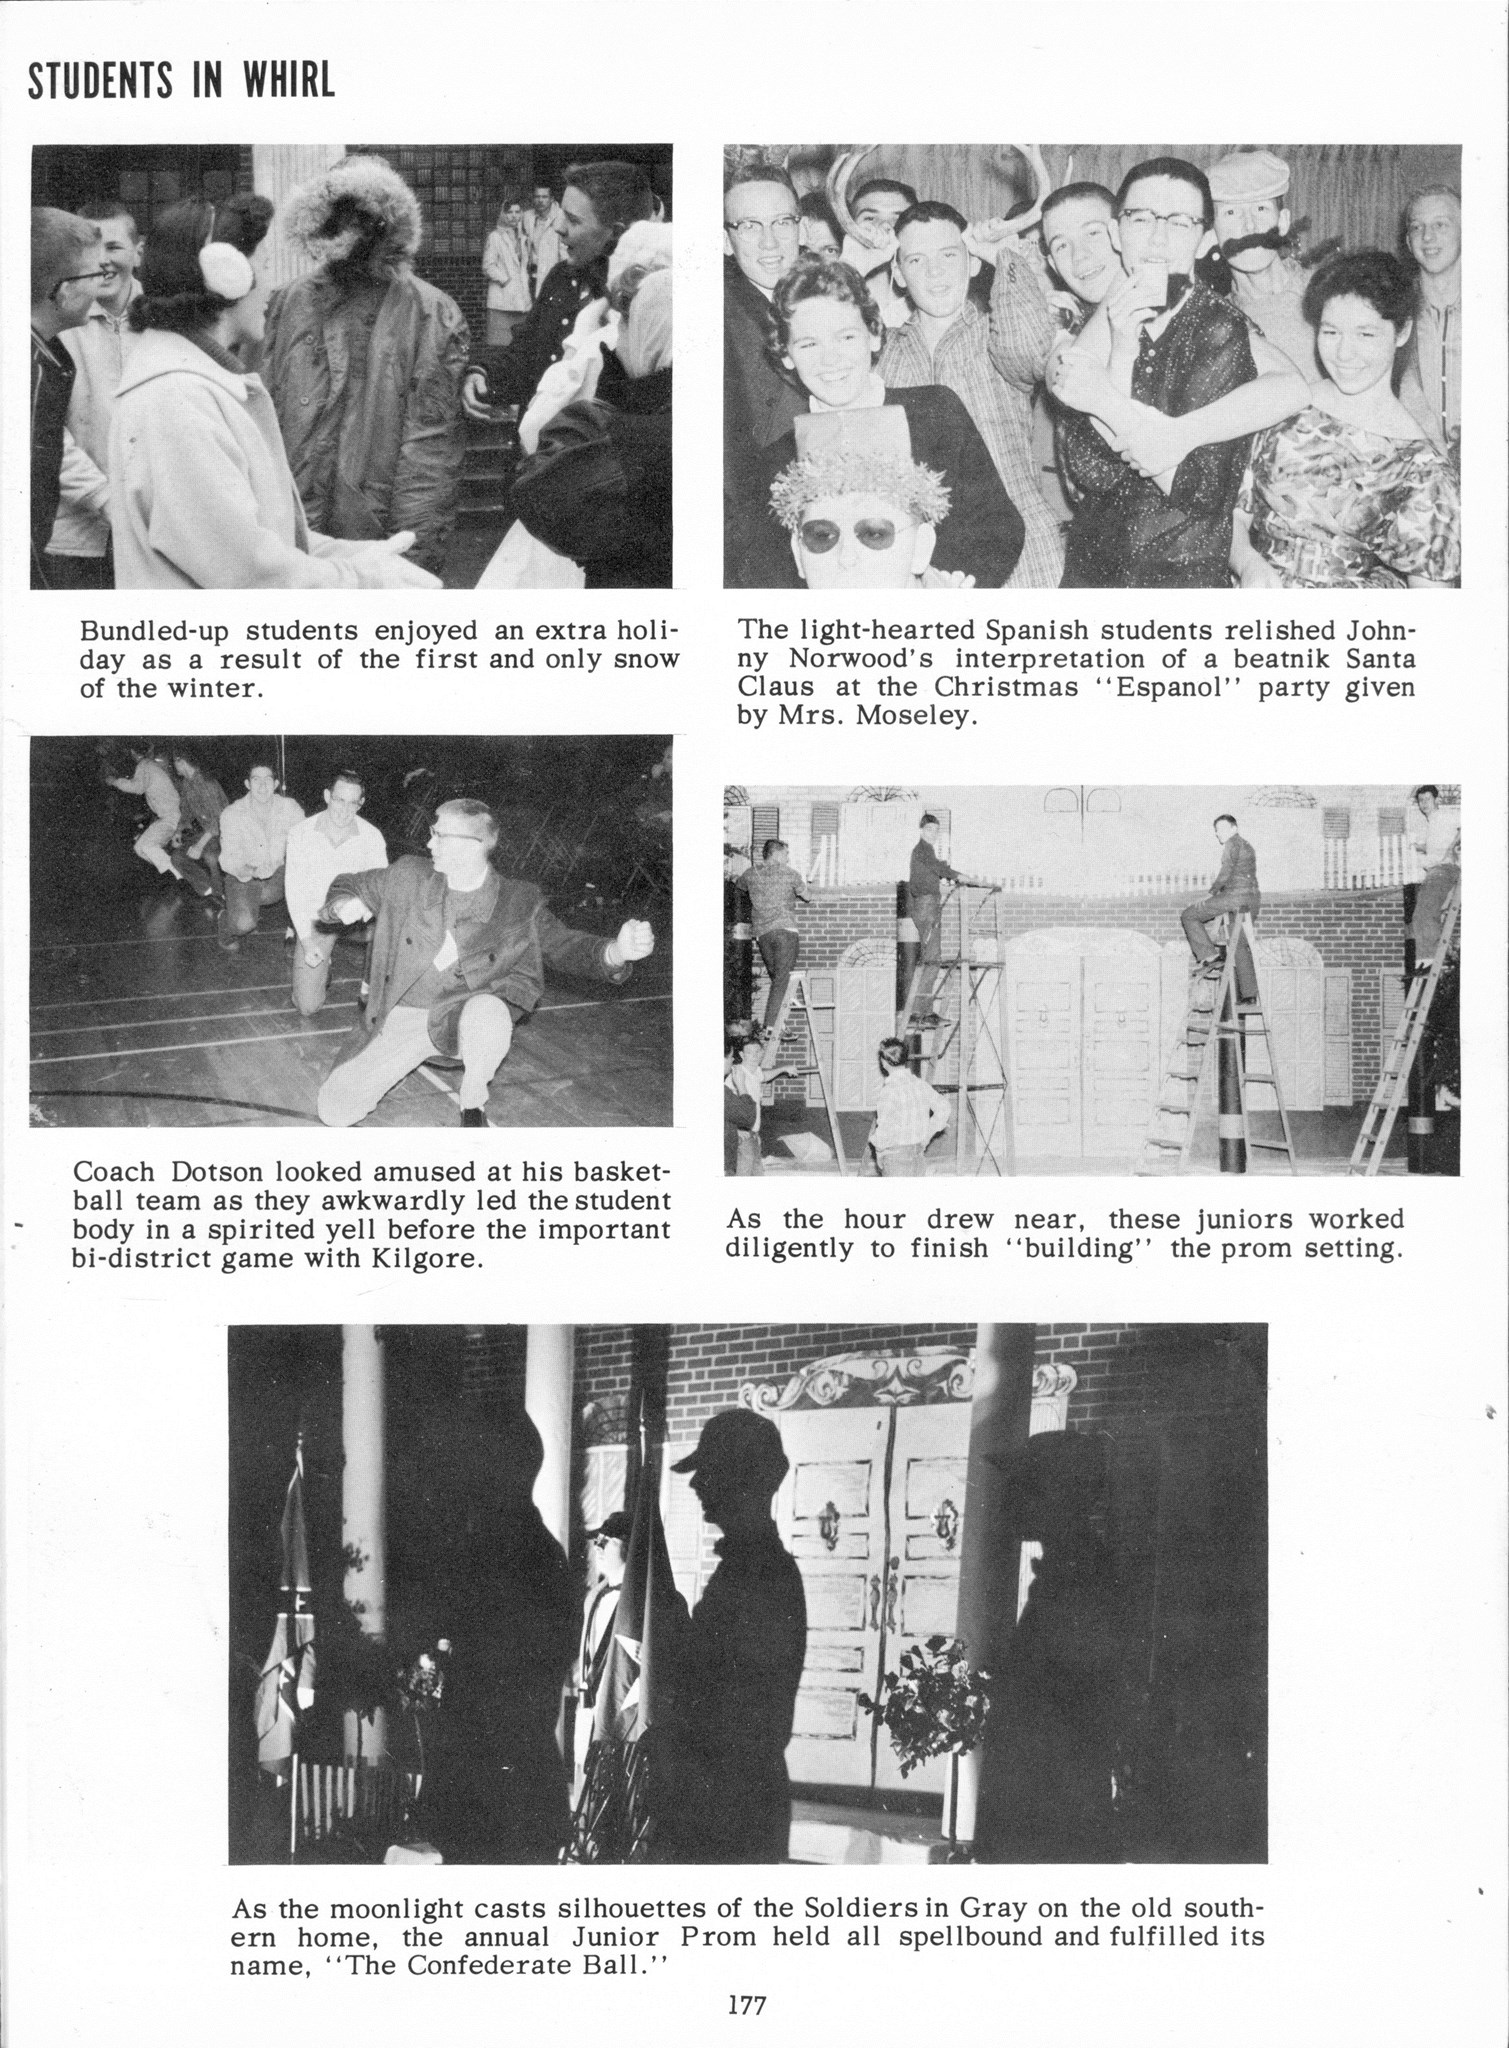 ../../../Images/Large/1960/Arclight-1960-pg0177.jpg